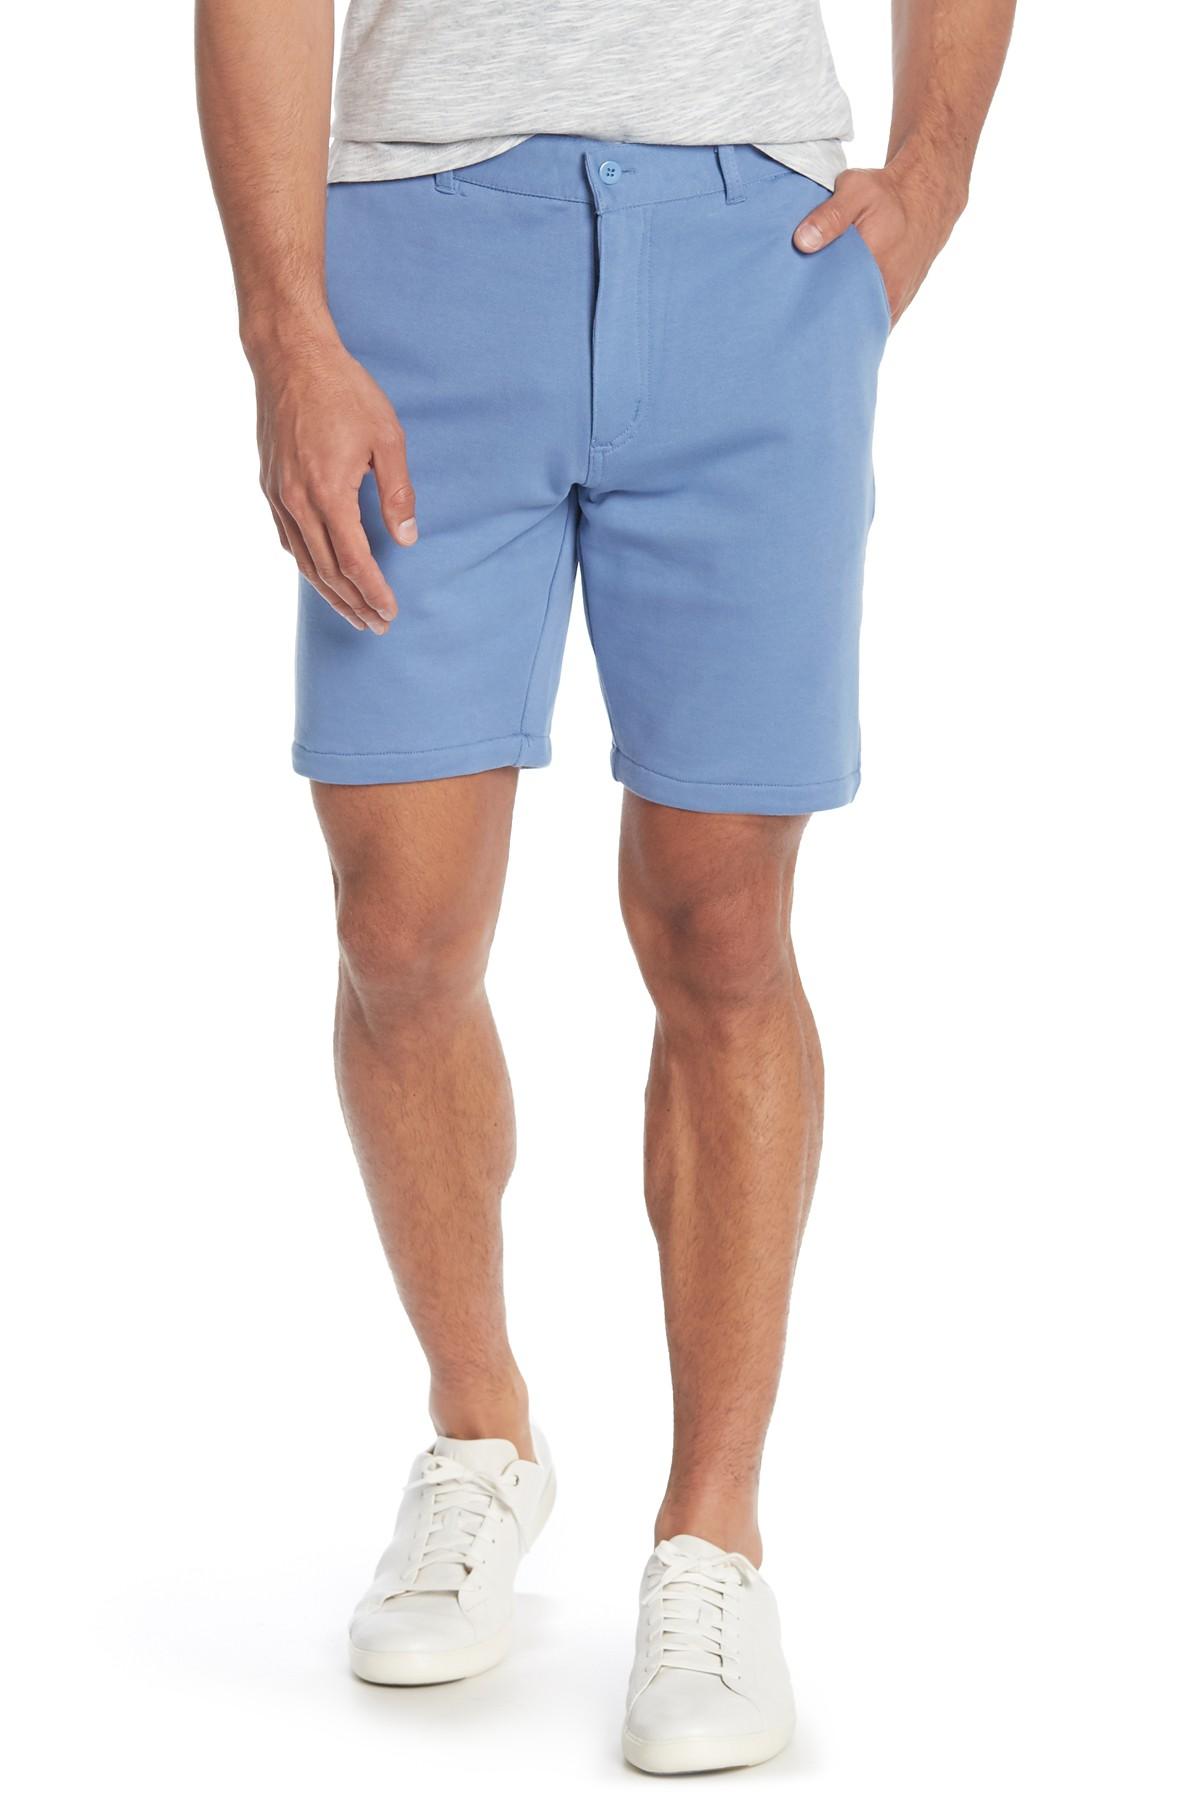 Slate & Stone French Terry Shorts in Blue for Men - Lyst